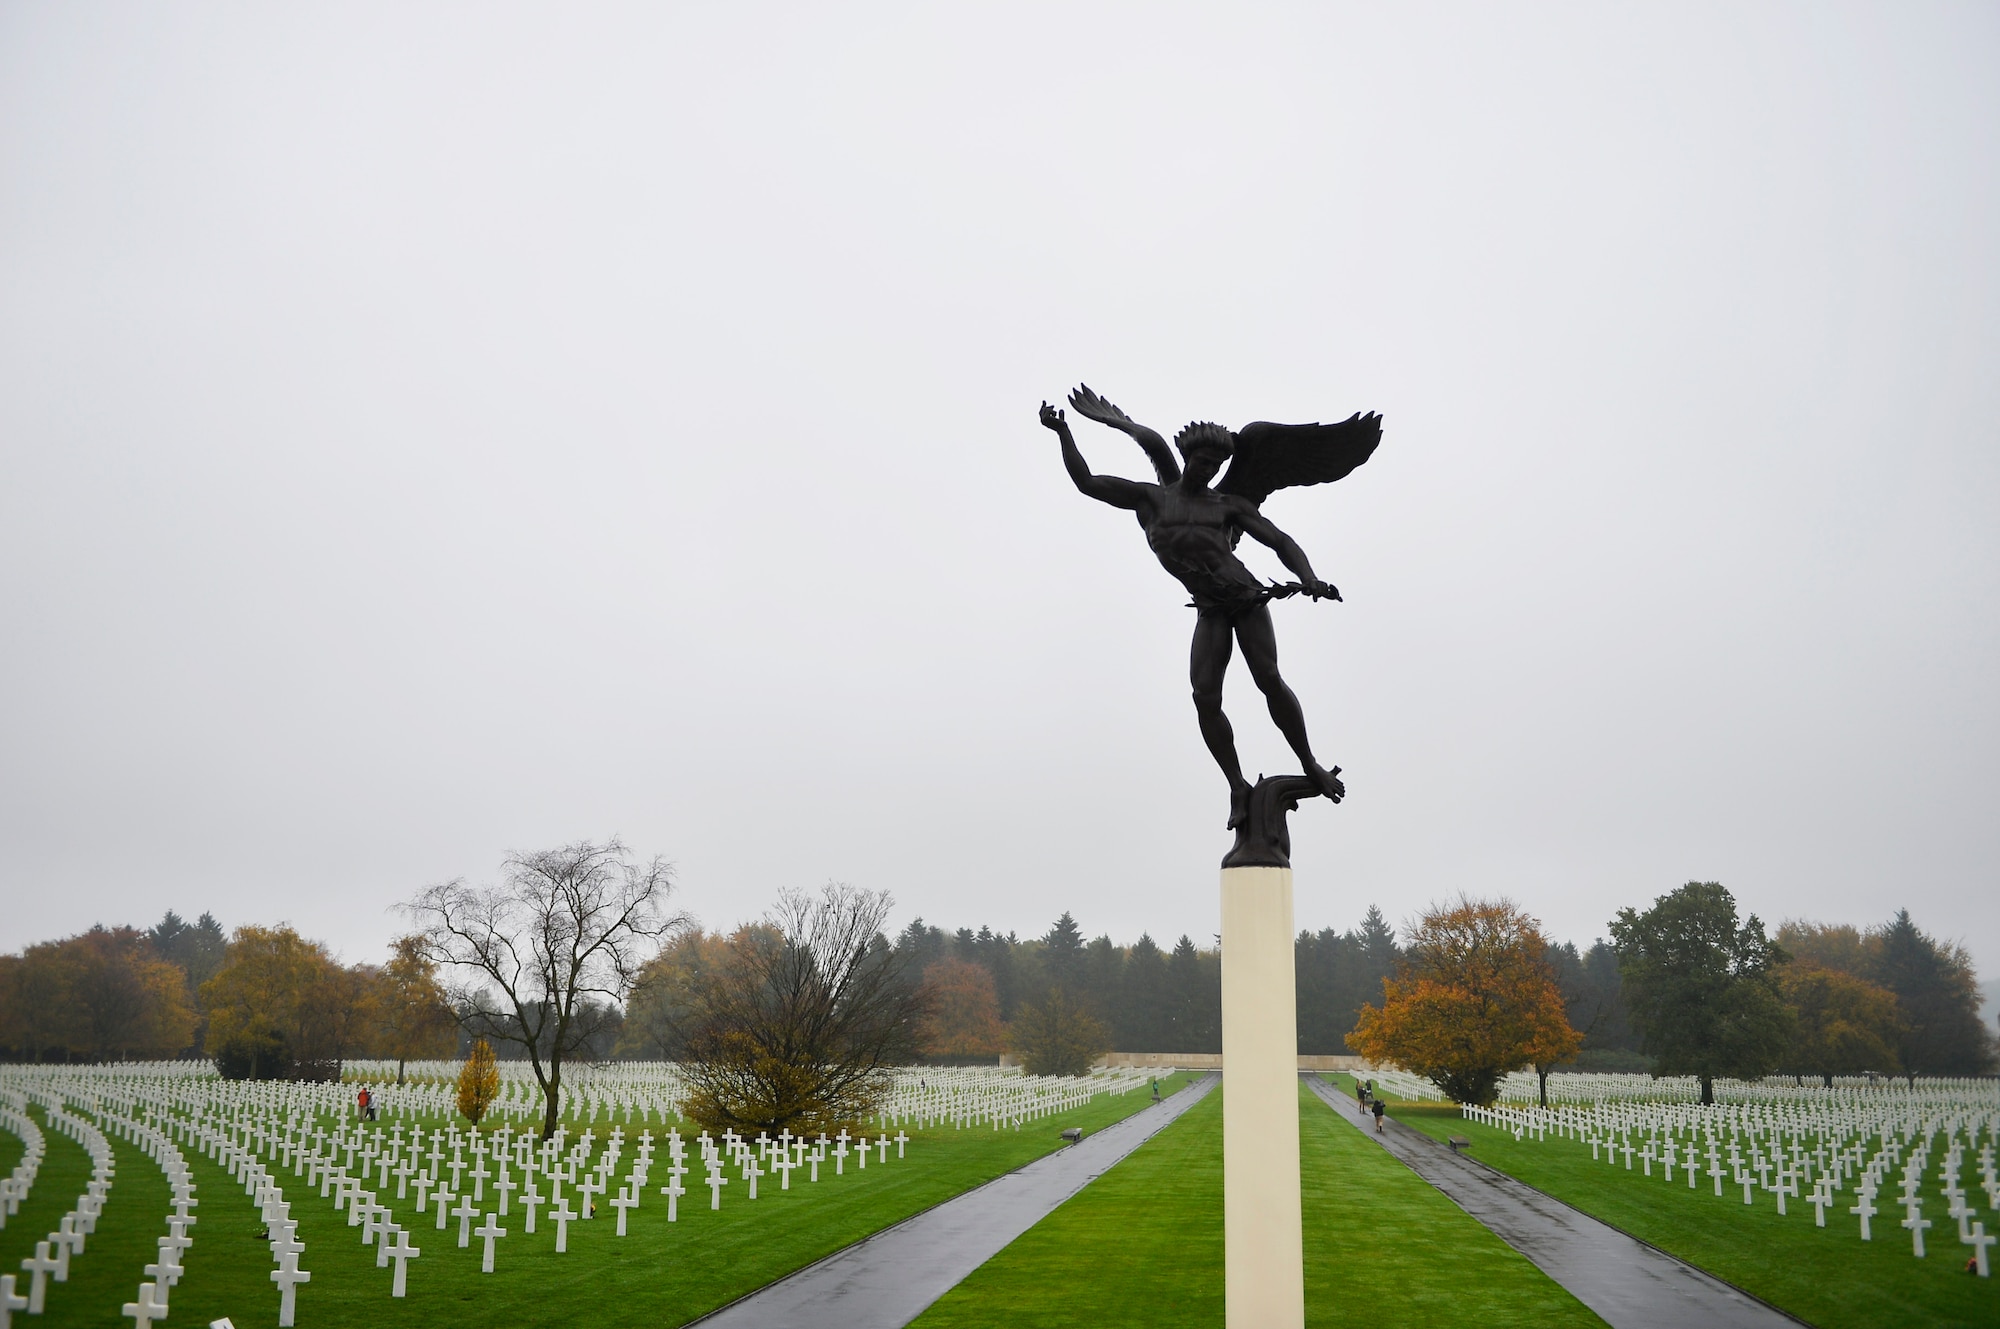 A statue towers above Henri-Chapelle American Cemetery and Memorial, Belgium, Nov. 11, 2017. The cemetery serves as the resting place for 7,992 Americans who fought in World War II. (U.S. Air Force photo by Airman 1st Class Joshua Magbanua)